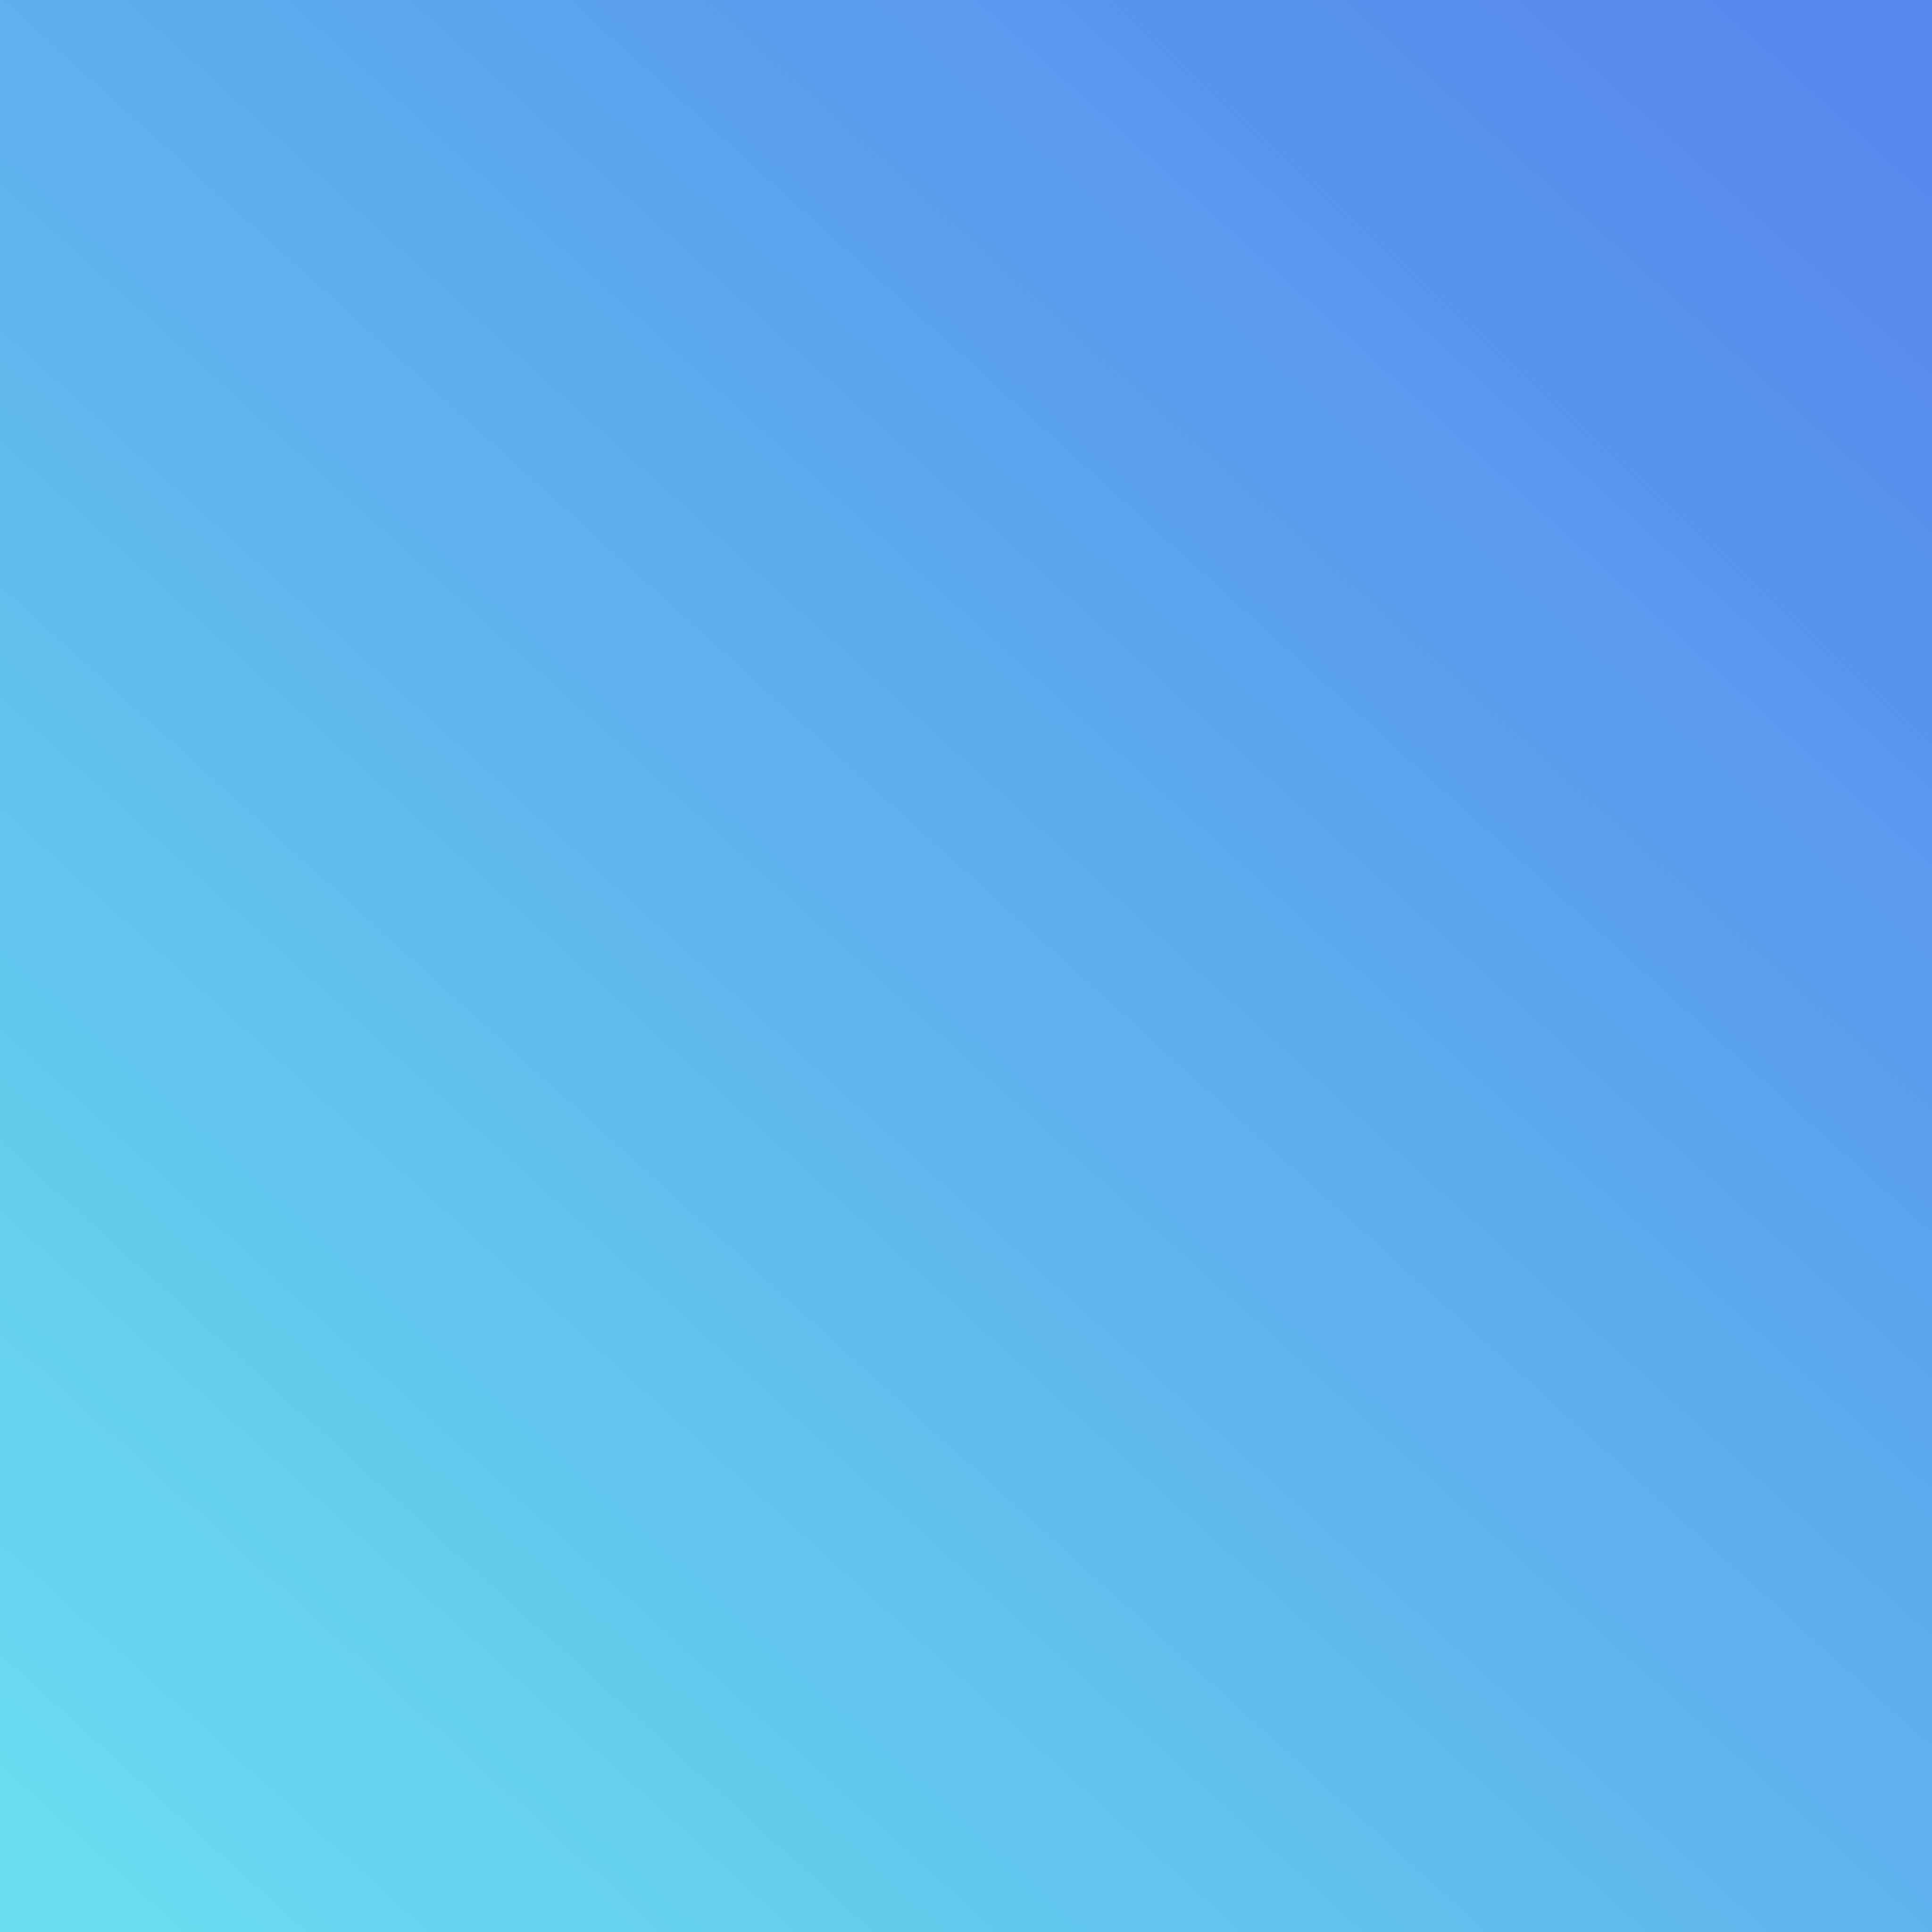 Today at Apple at Home Gradient Wallpaper